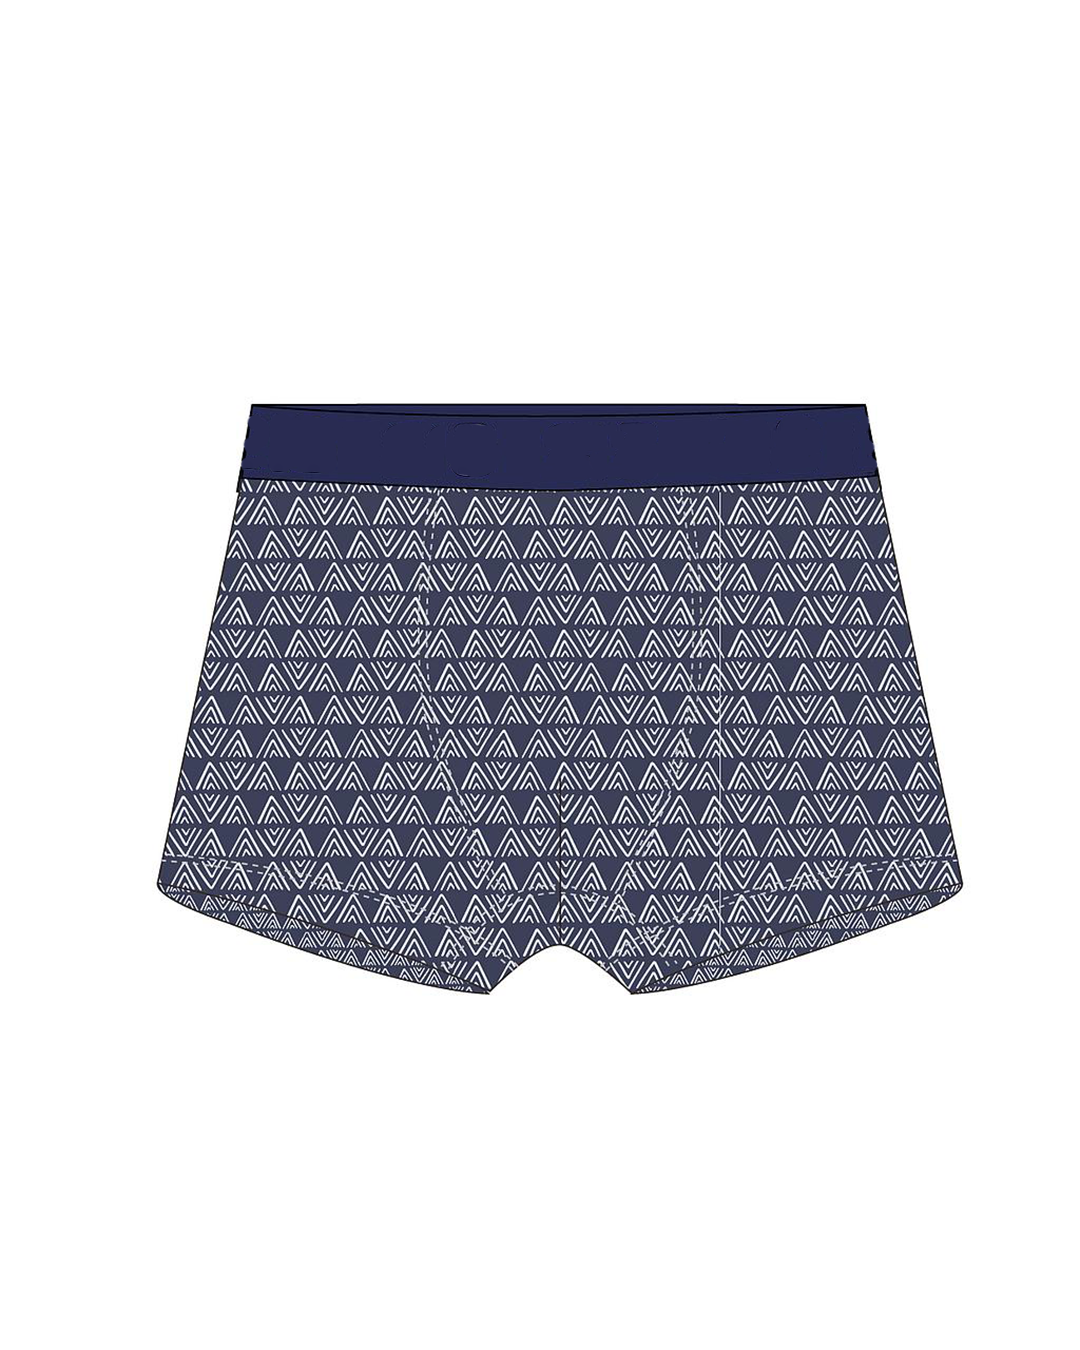 Men's boxers with triangles